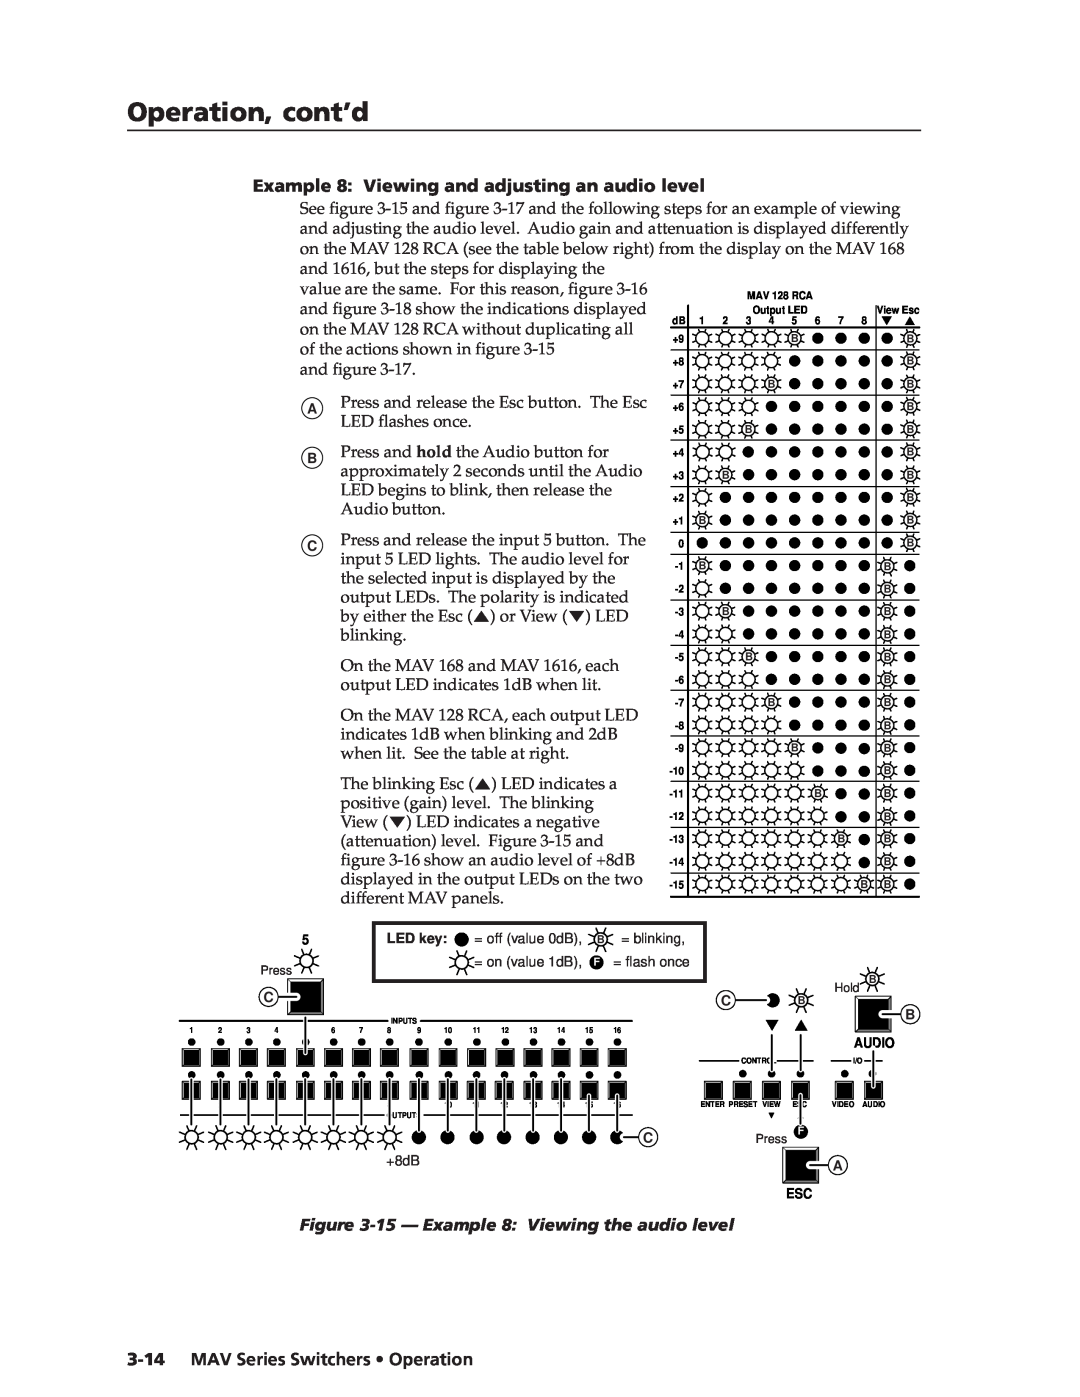 Extron electronic MAV manual Example 8 Viewing and adjusting an audio level, 15 - Example 8 Viewing the audio level 